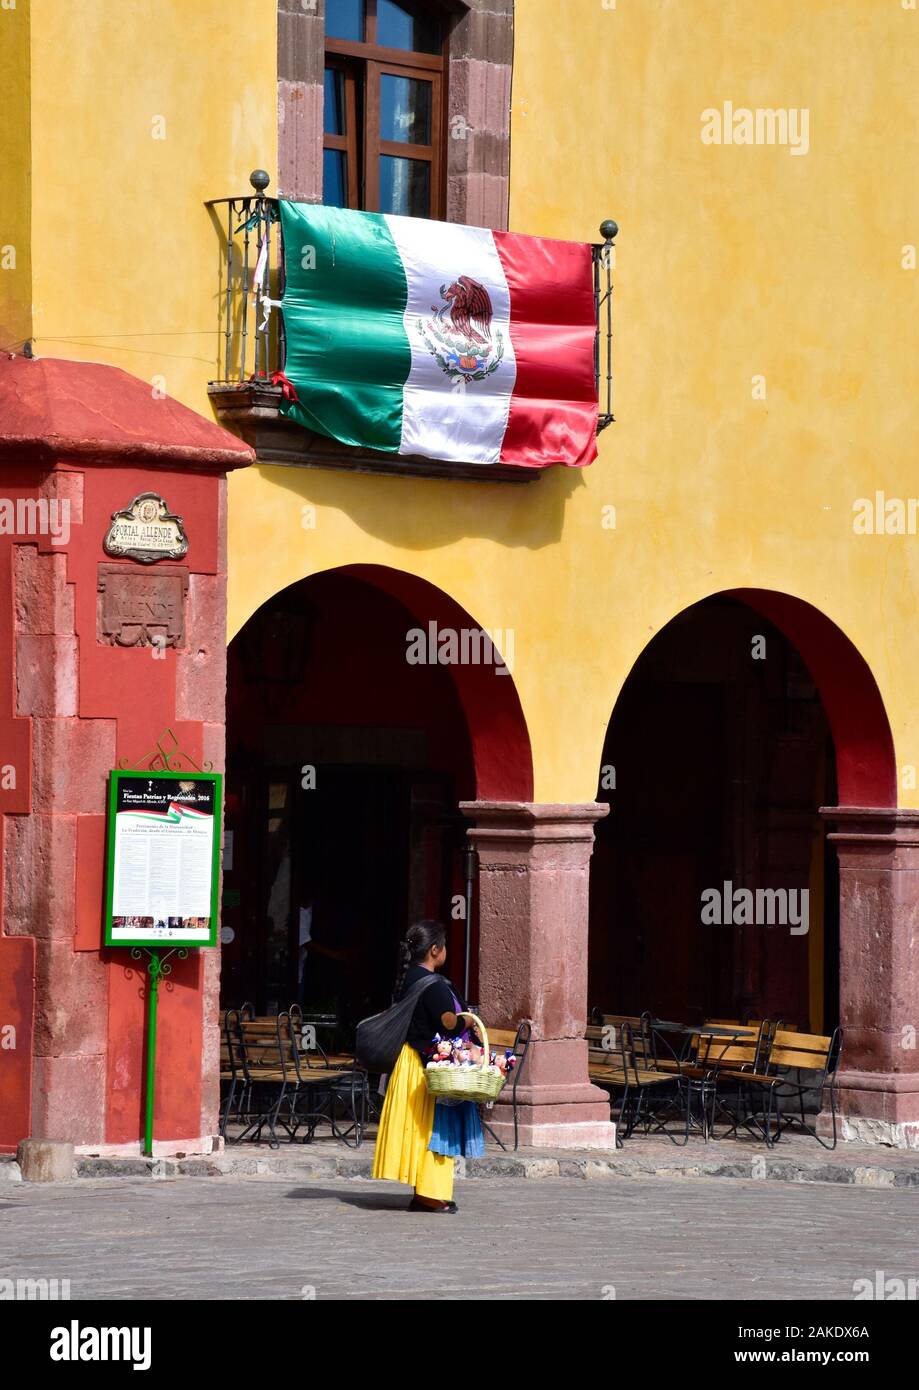 Street vendor selling souveniers to tourists in the Zocalo and Jardin Allende, San Miguel de Allende, Mexico Stock Photo